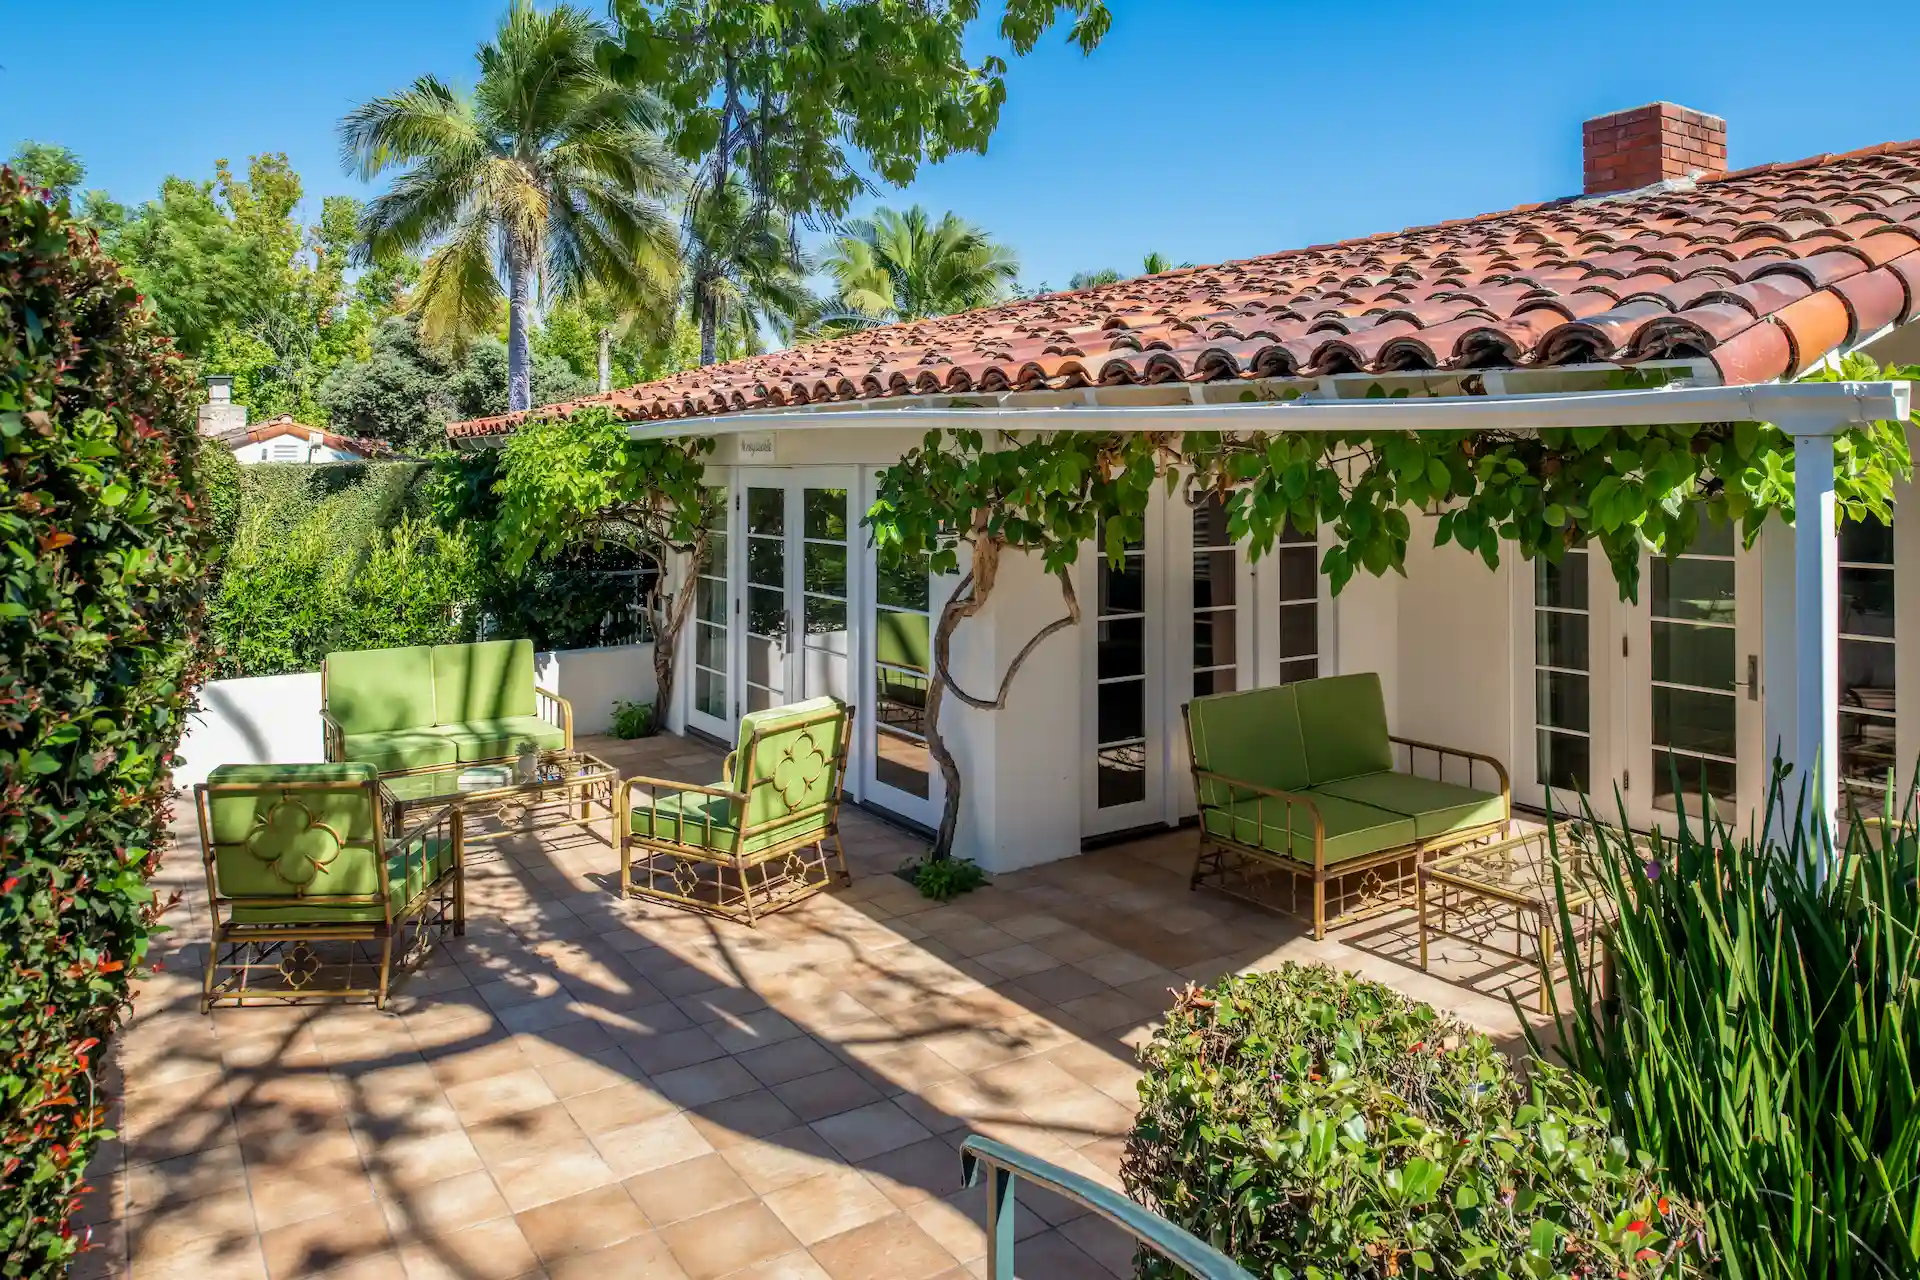 The Inn at Rancho Santa Fe: Bungalow patio with garden, a green sofa on the porch, on a sunny day with palm trees in the background.